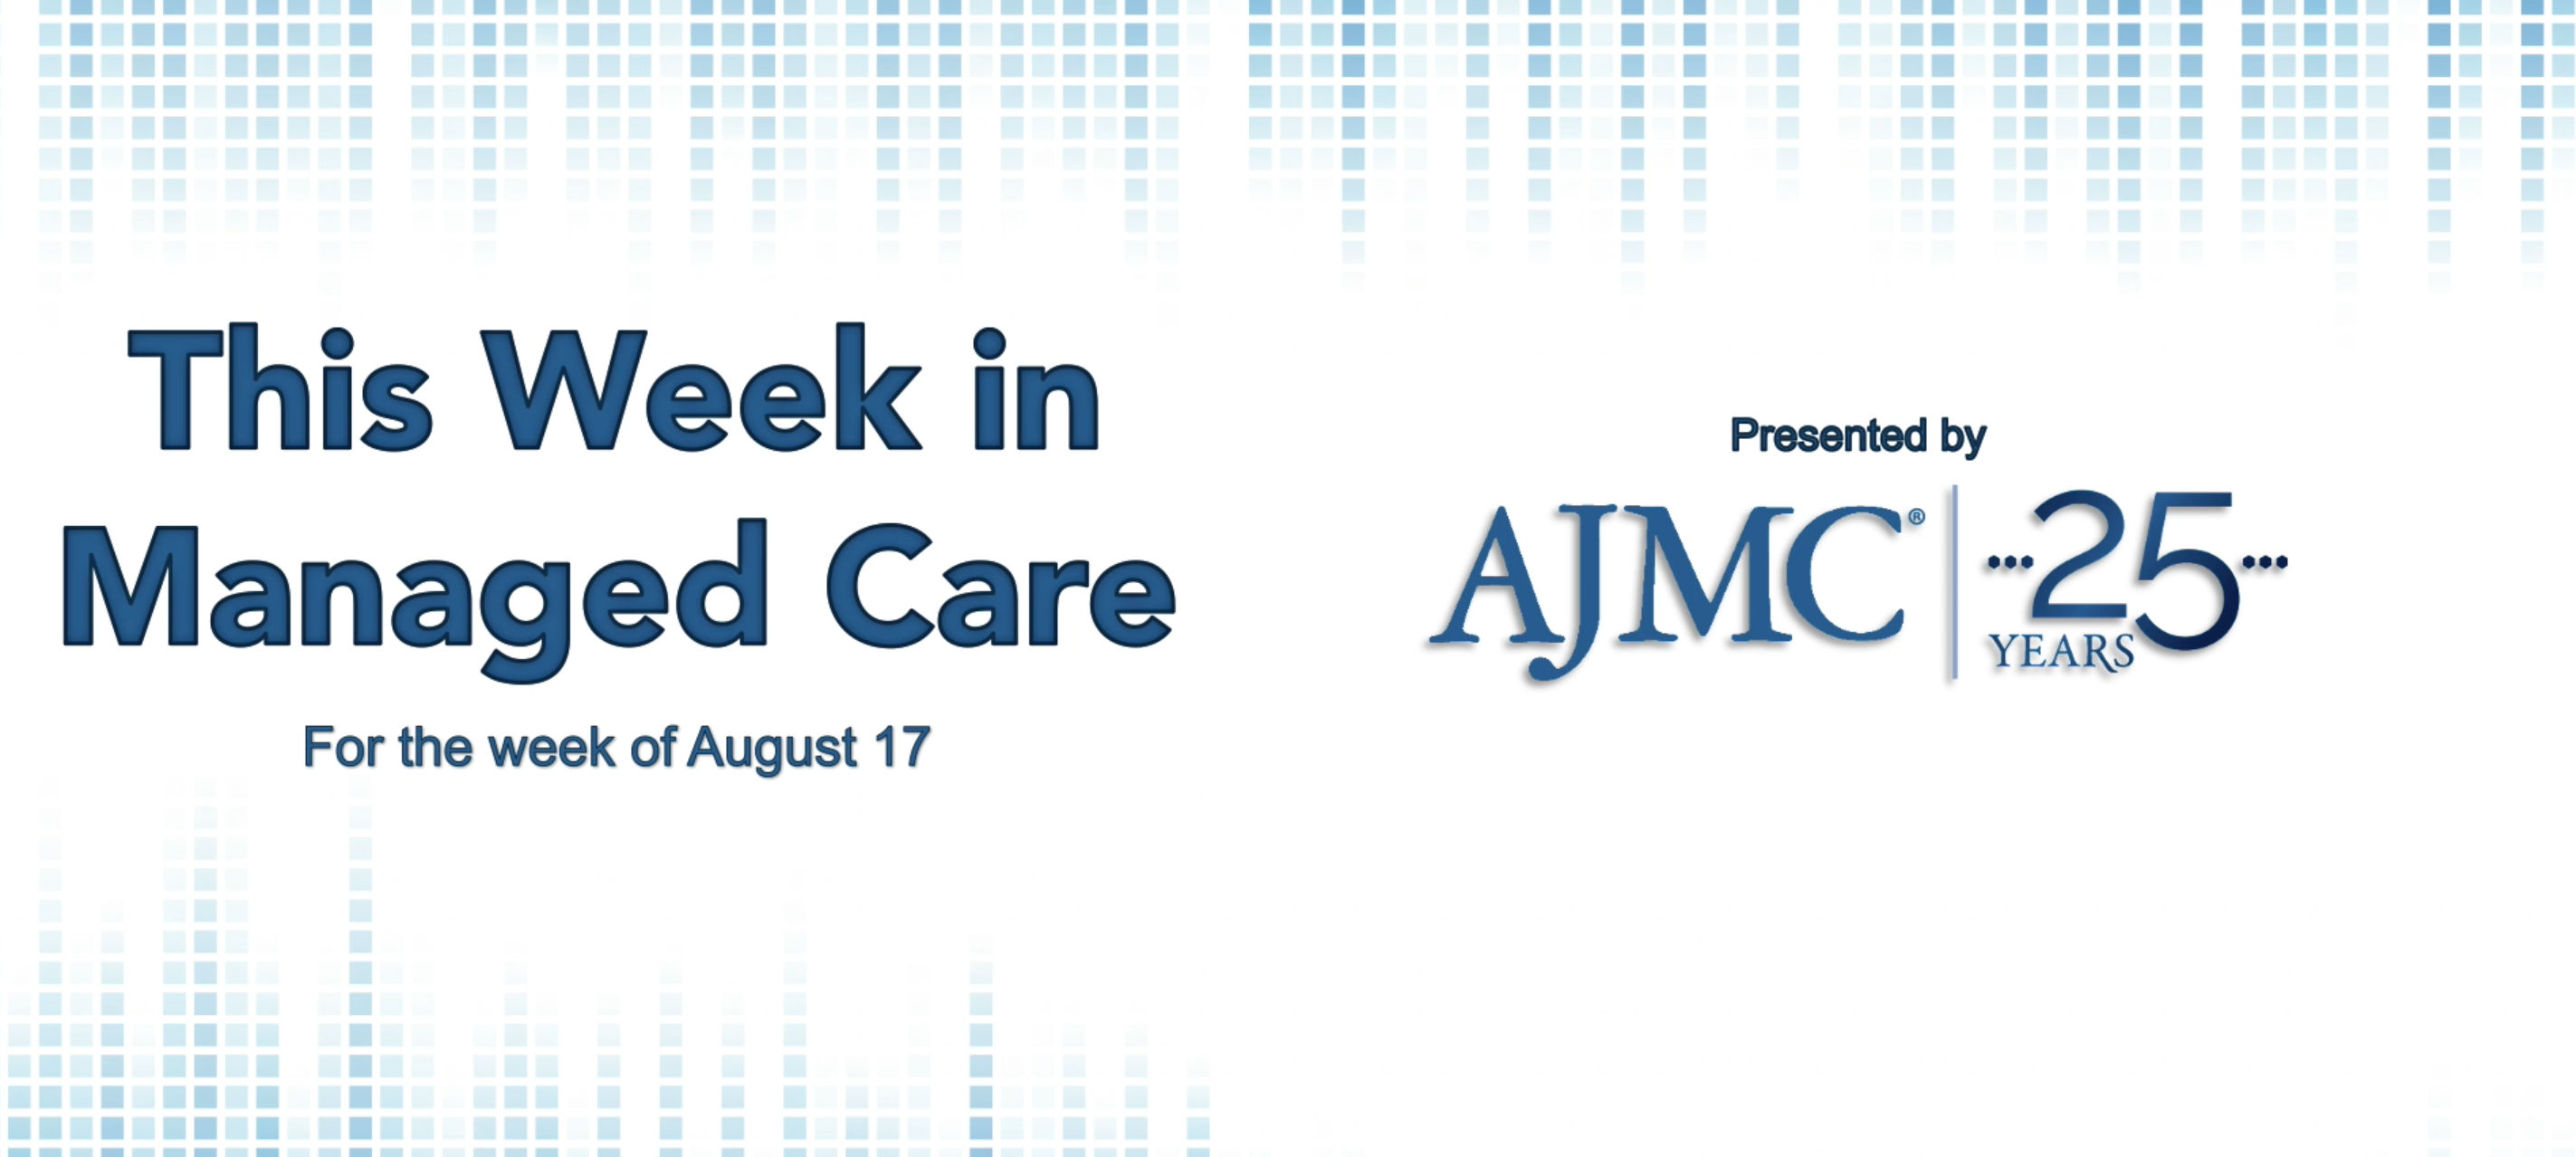 This Week in Managed Care for the week of August 17